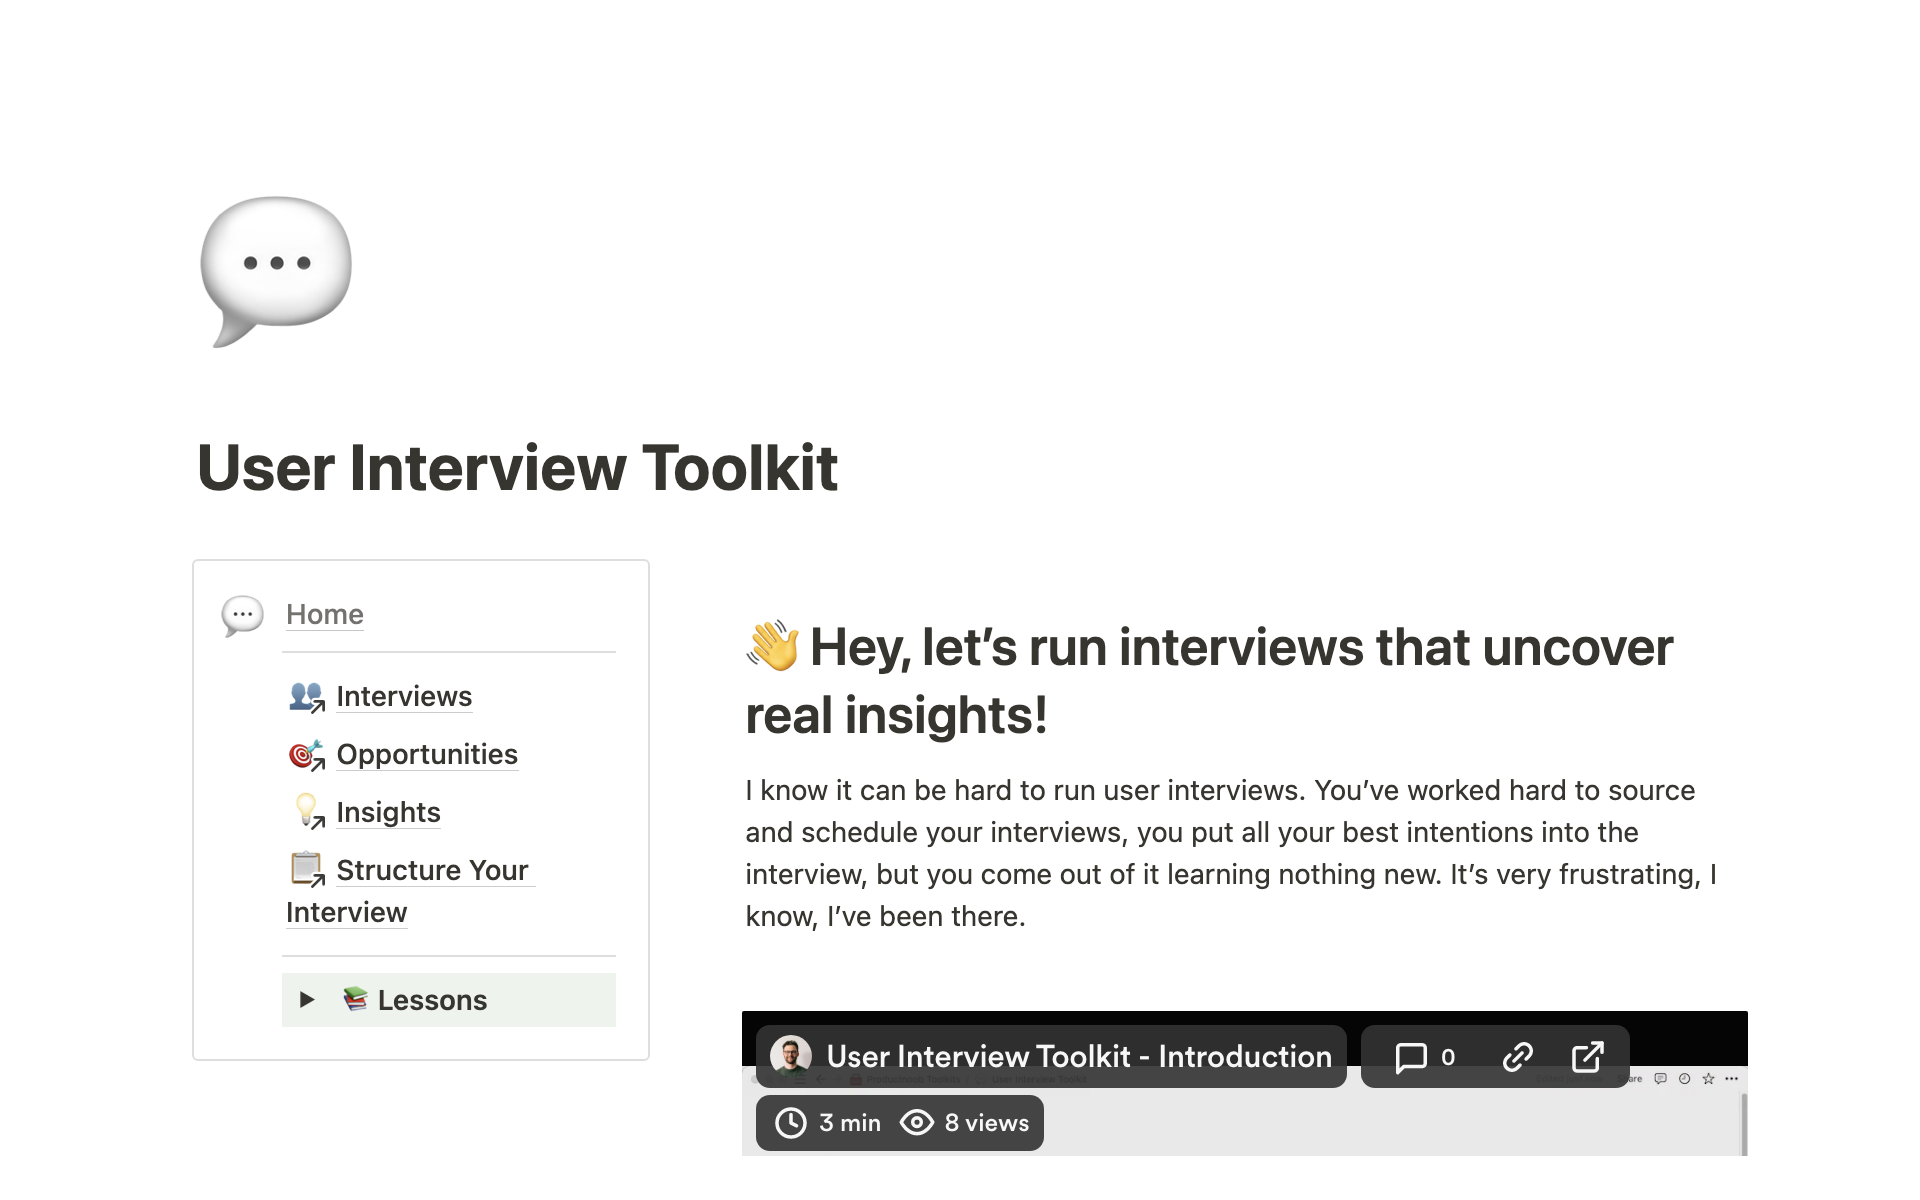 Create the perfect interview template to understand your users' needs and pains.